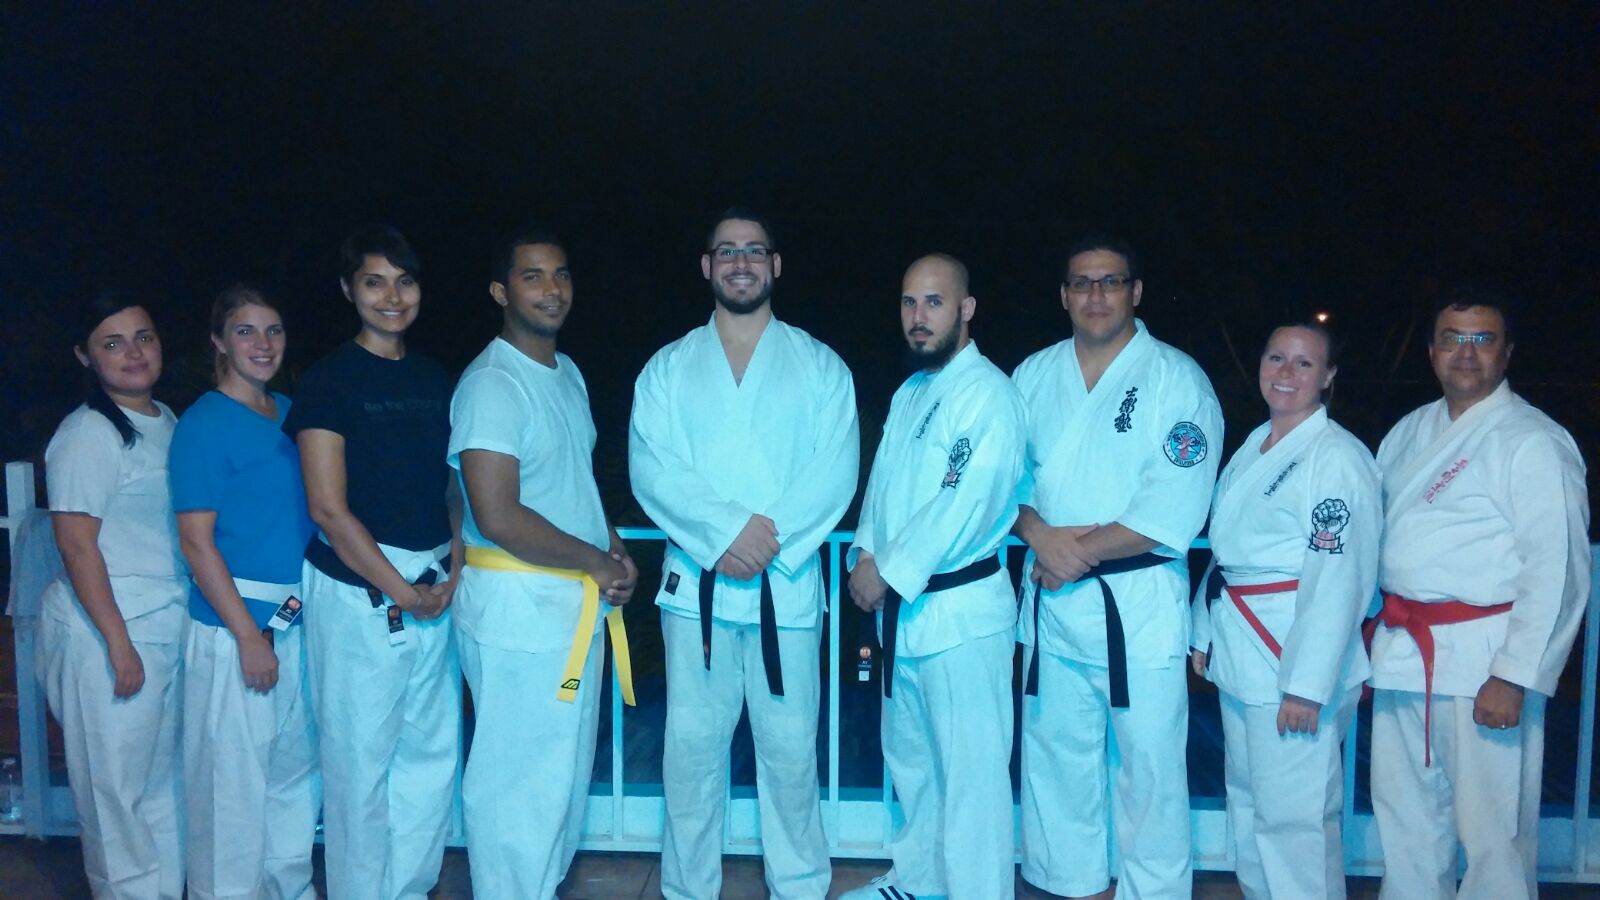 One of the best times of my life, Says Kyoshi Arthur DeBuc 8th Dan.